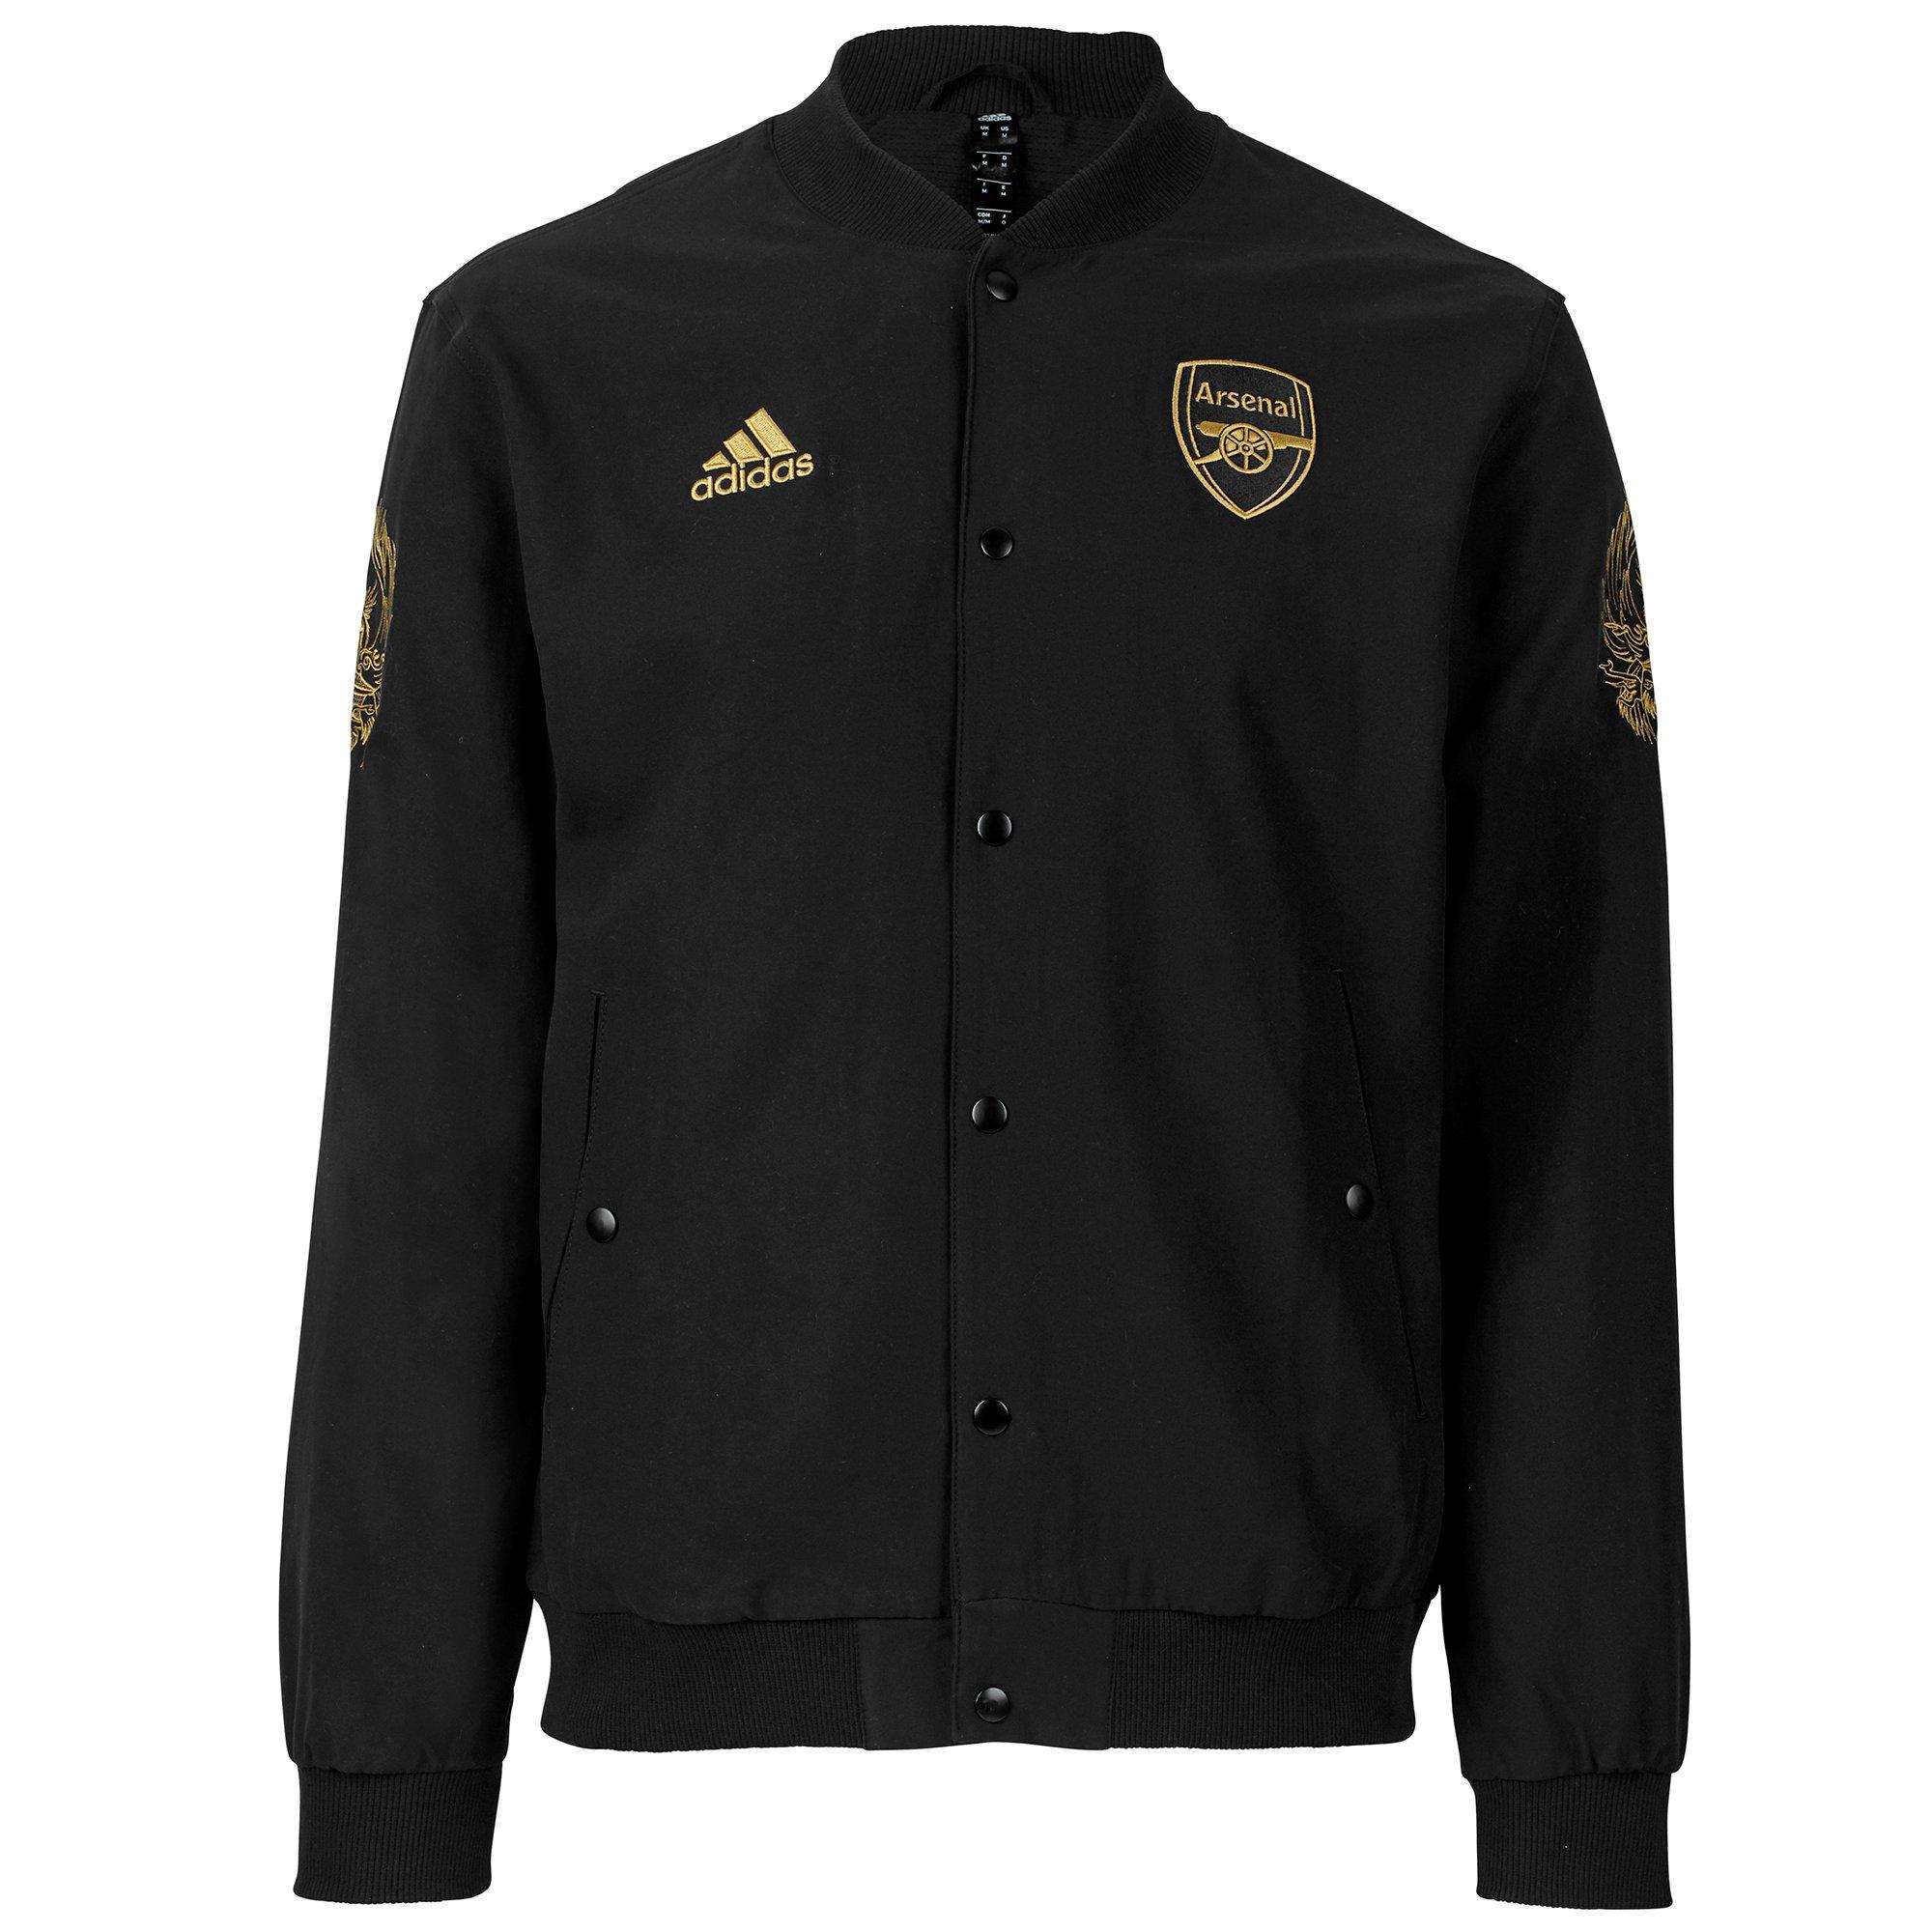 Arsenal CNY Jacket | Official Online Store